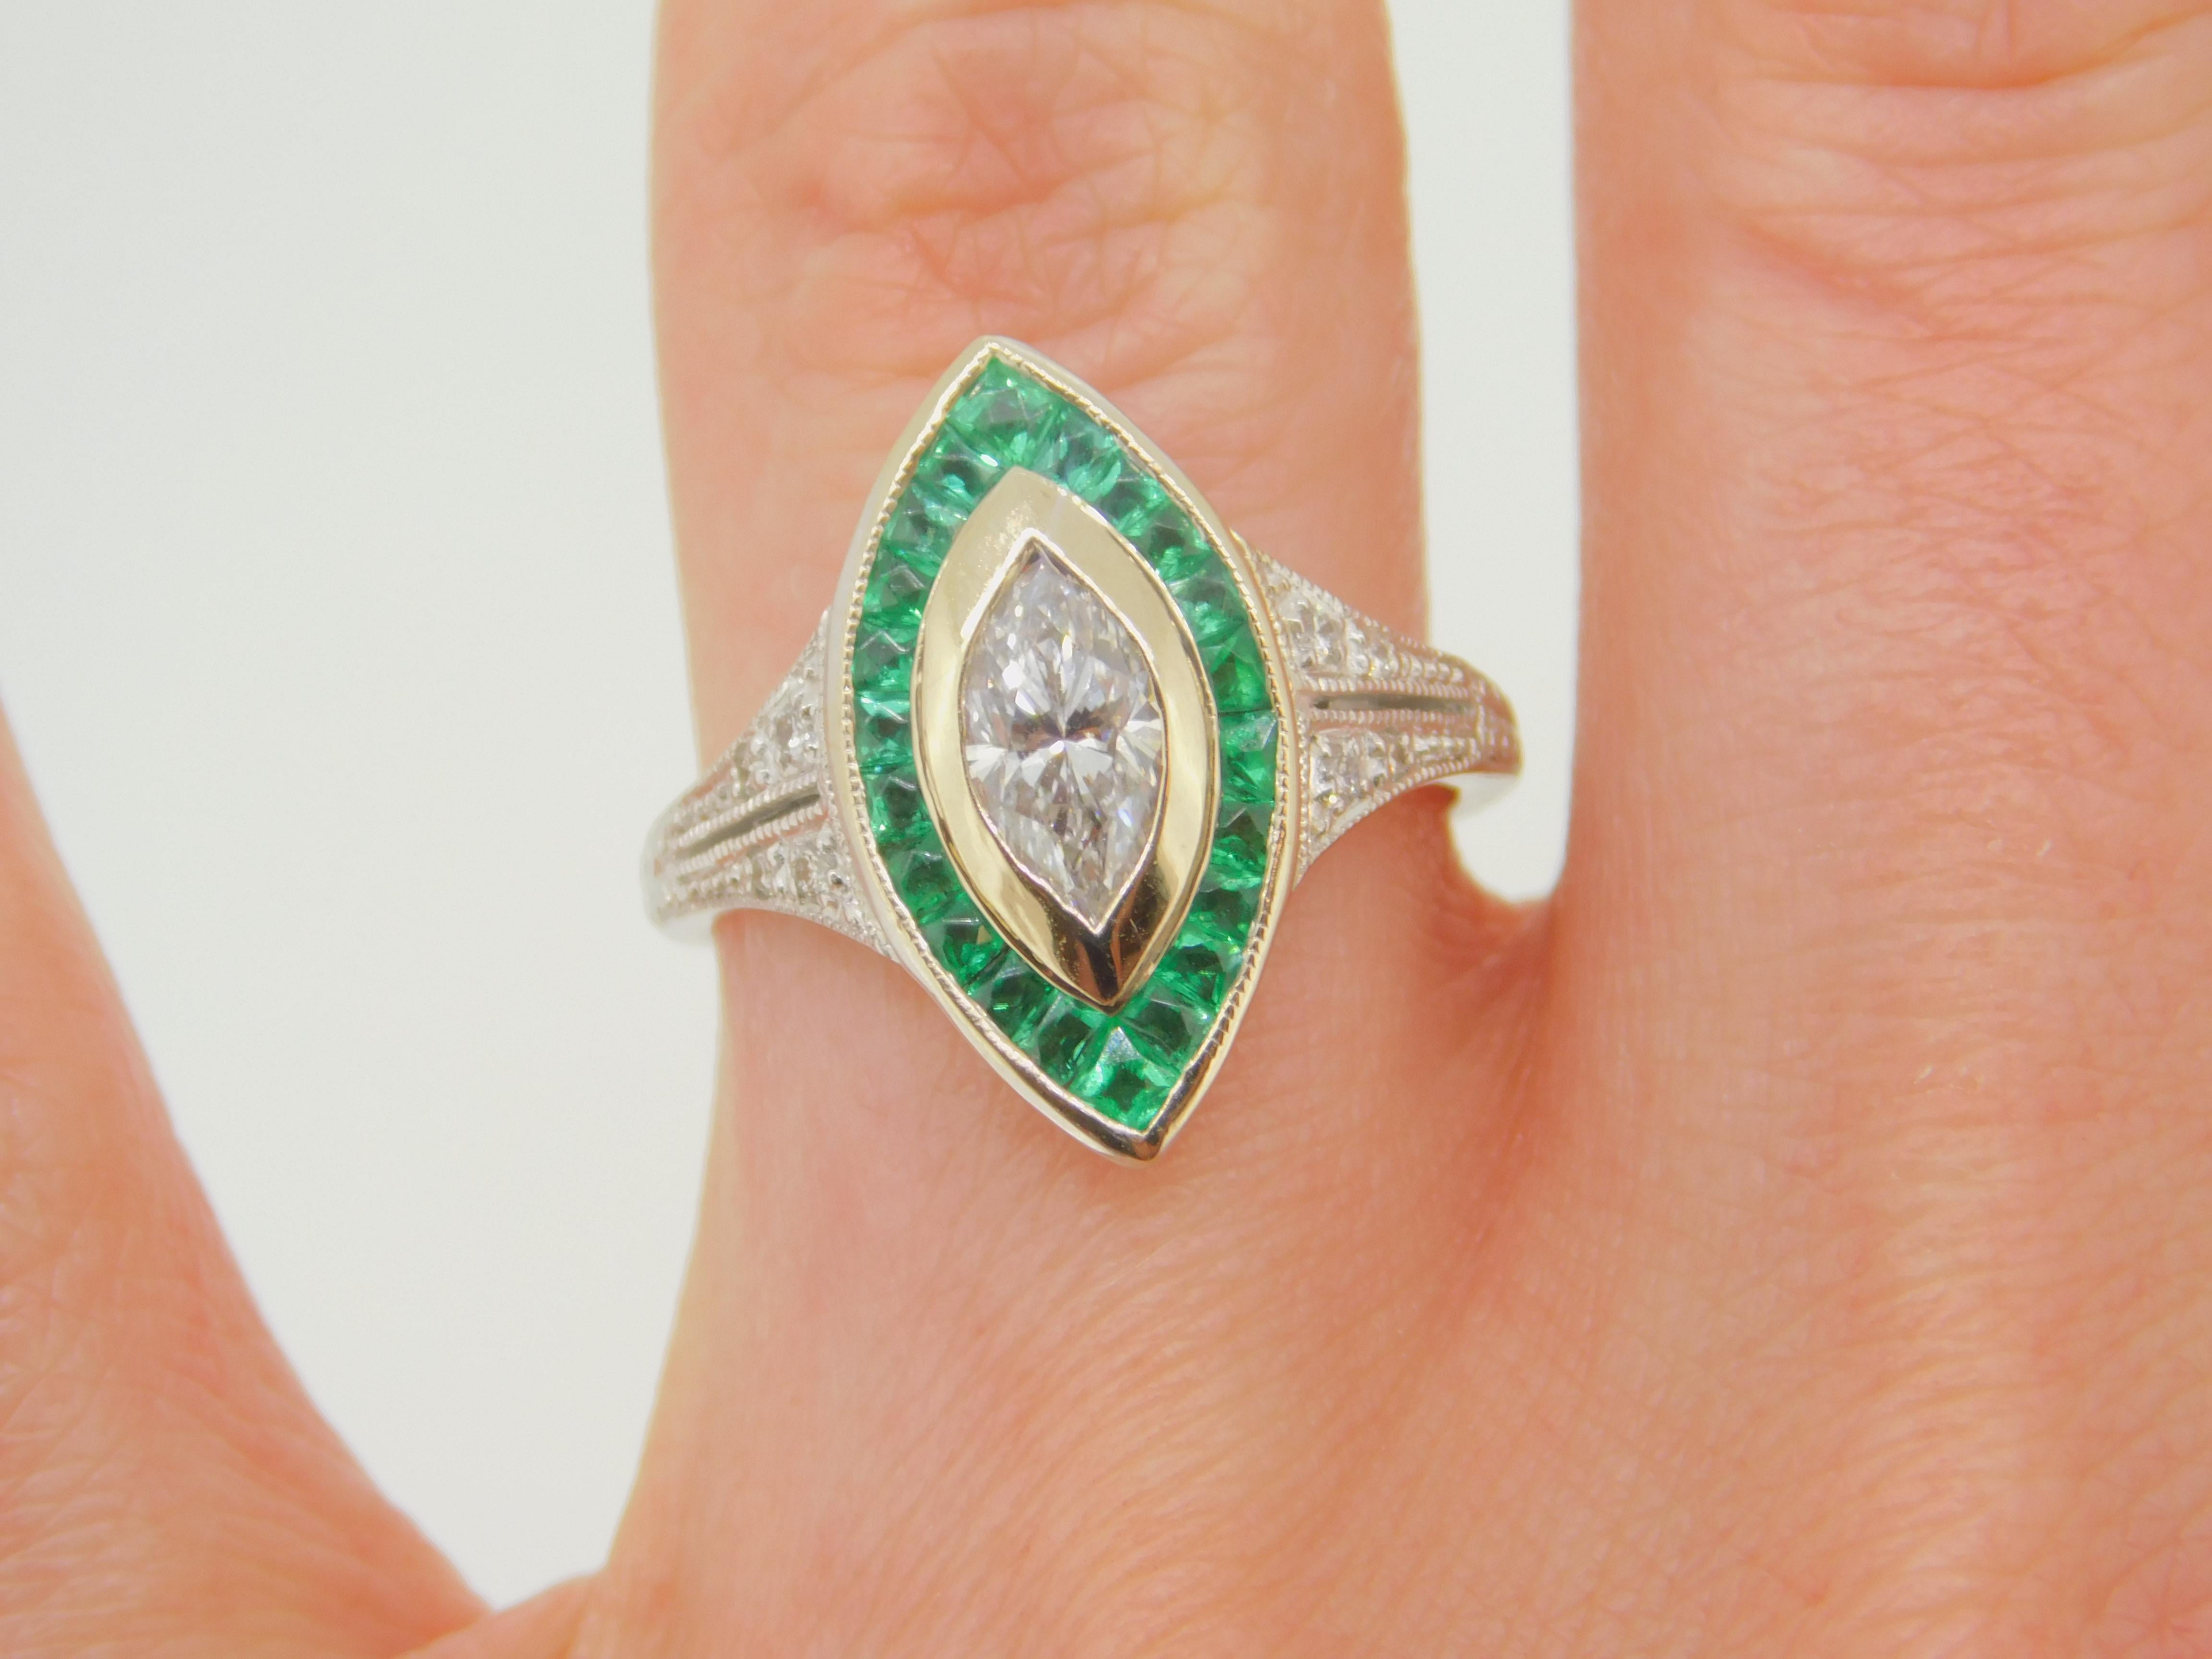 18k Gold .70ct Genuine Natural Diamond Ring with 1.5ct Emerald Halo '#J4110' For Sale 1